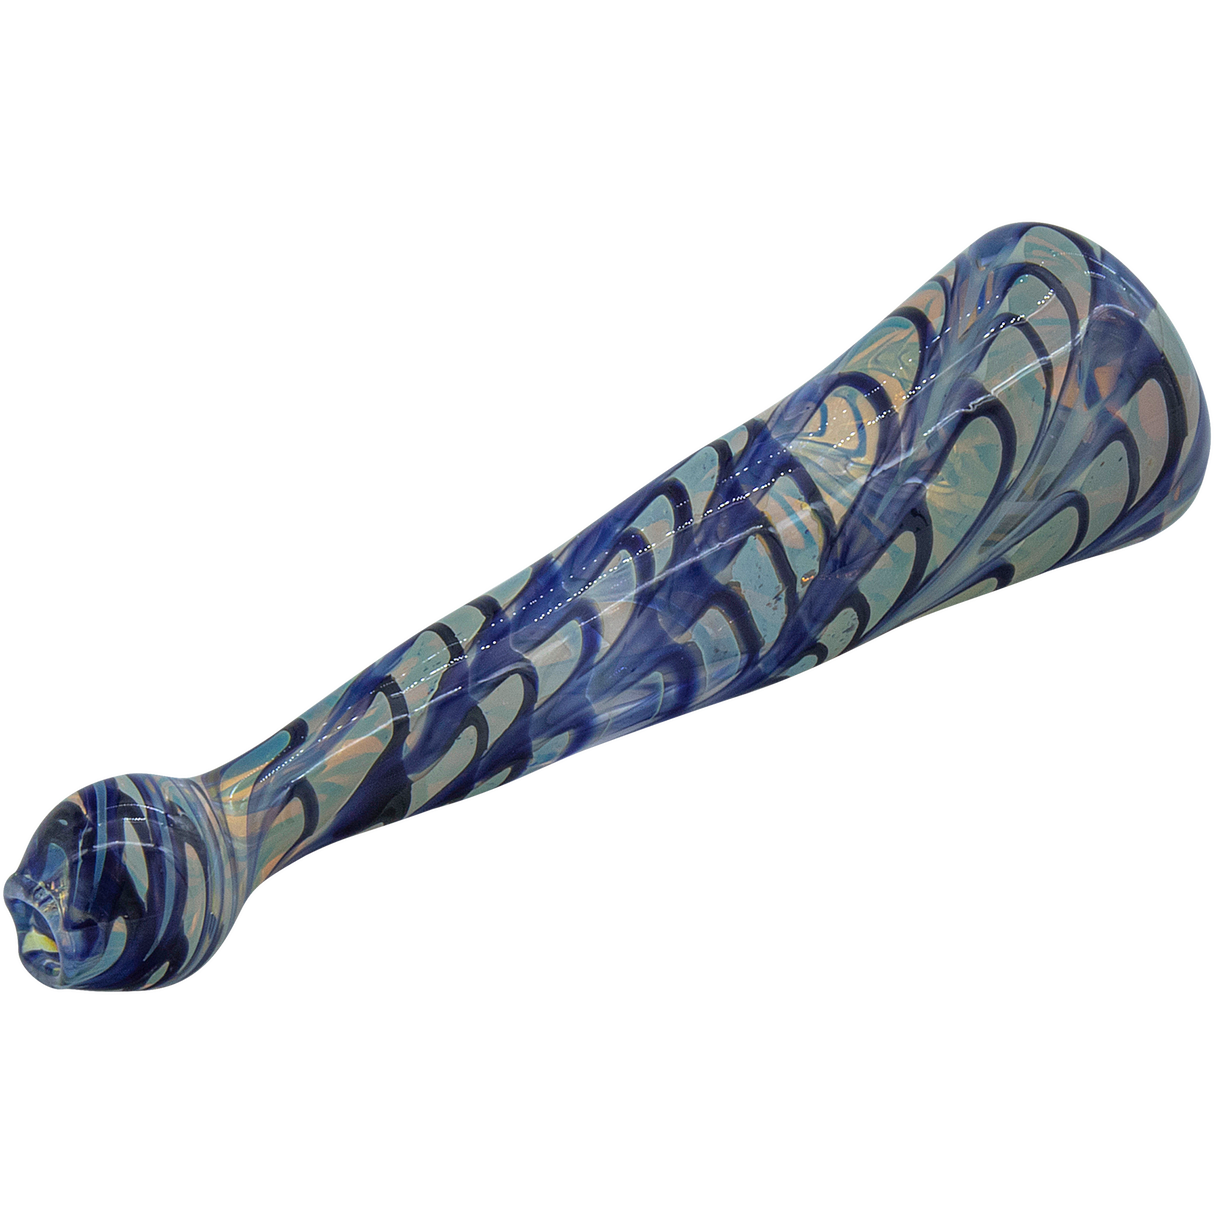 LA Pipes "Typhoon" Colored Chillum for Dry Herbs, 4.5" Borosilicate Glass, Side View